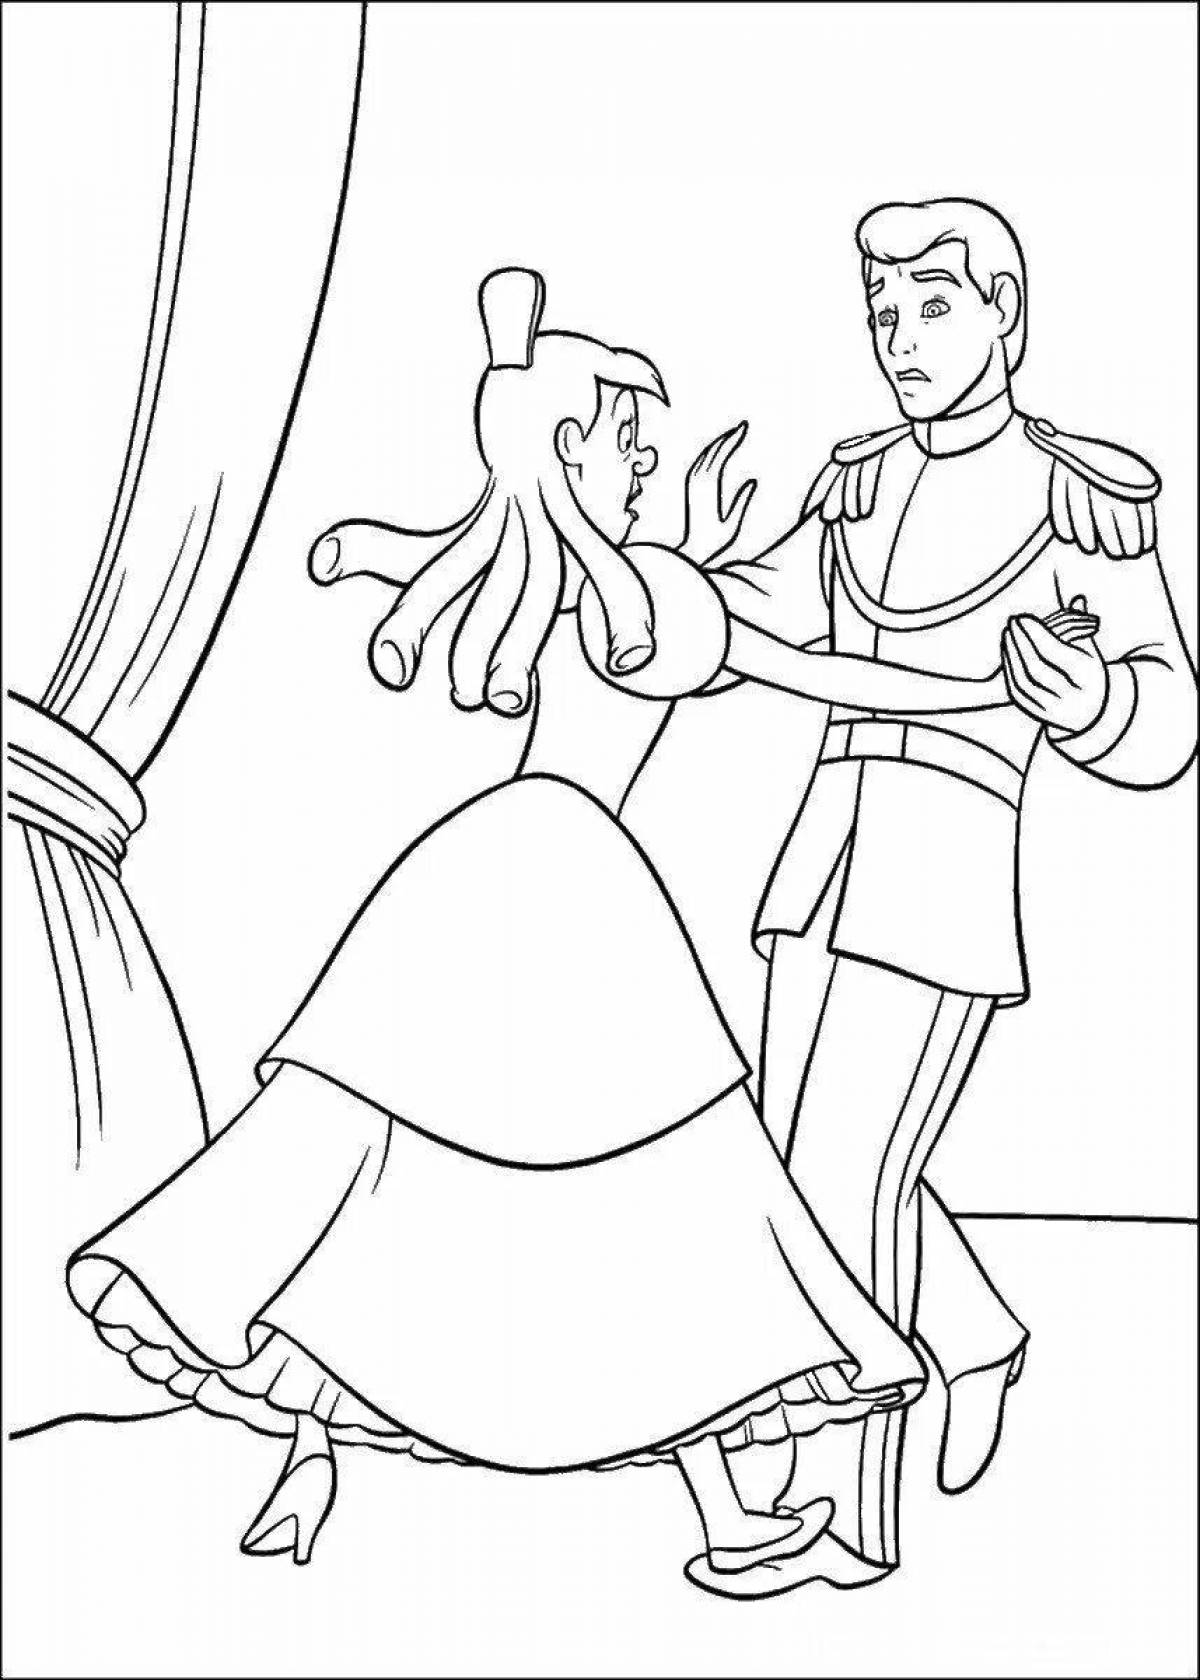 Violent Cinderella and the prince coloring book